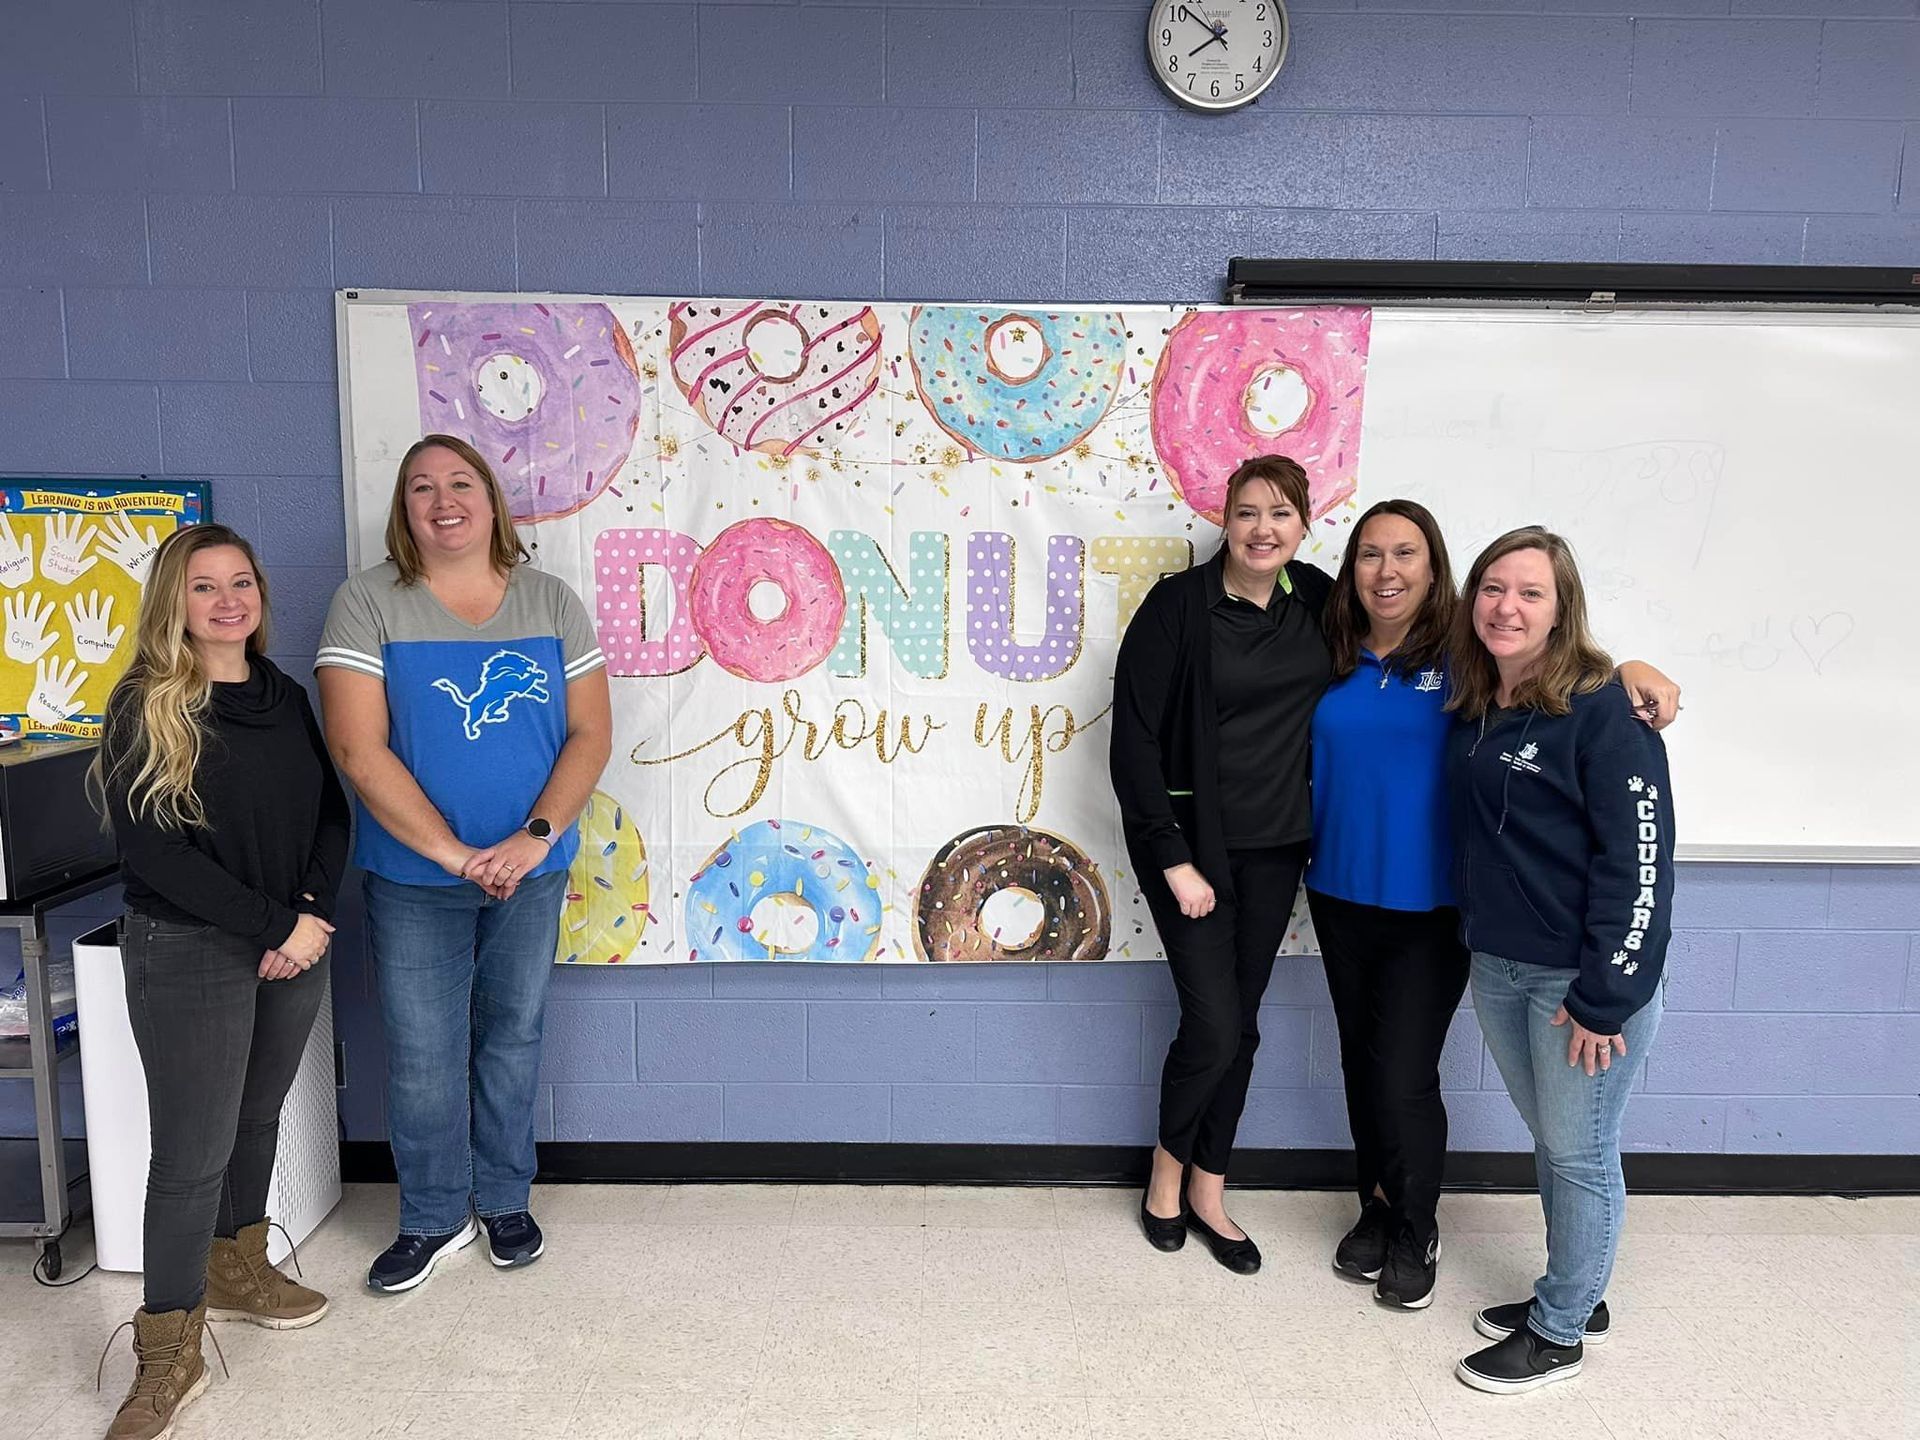 a group of women standing in front of a donut grow up sign.